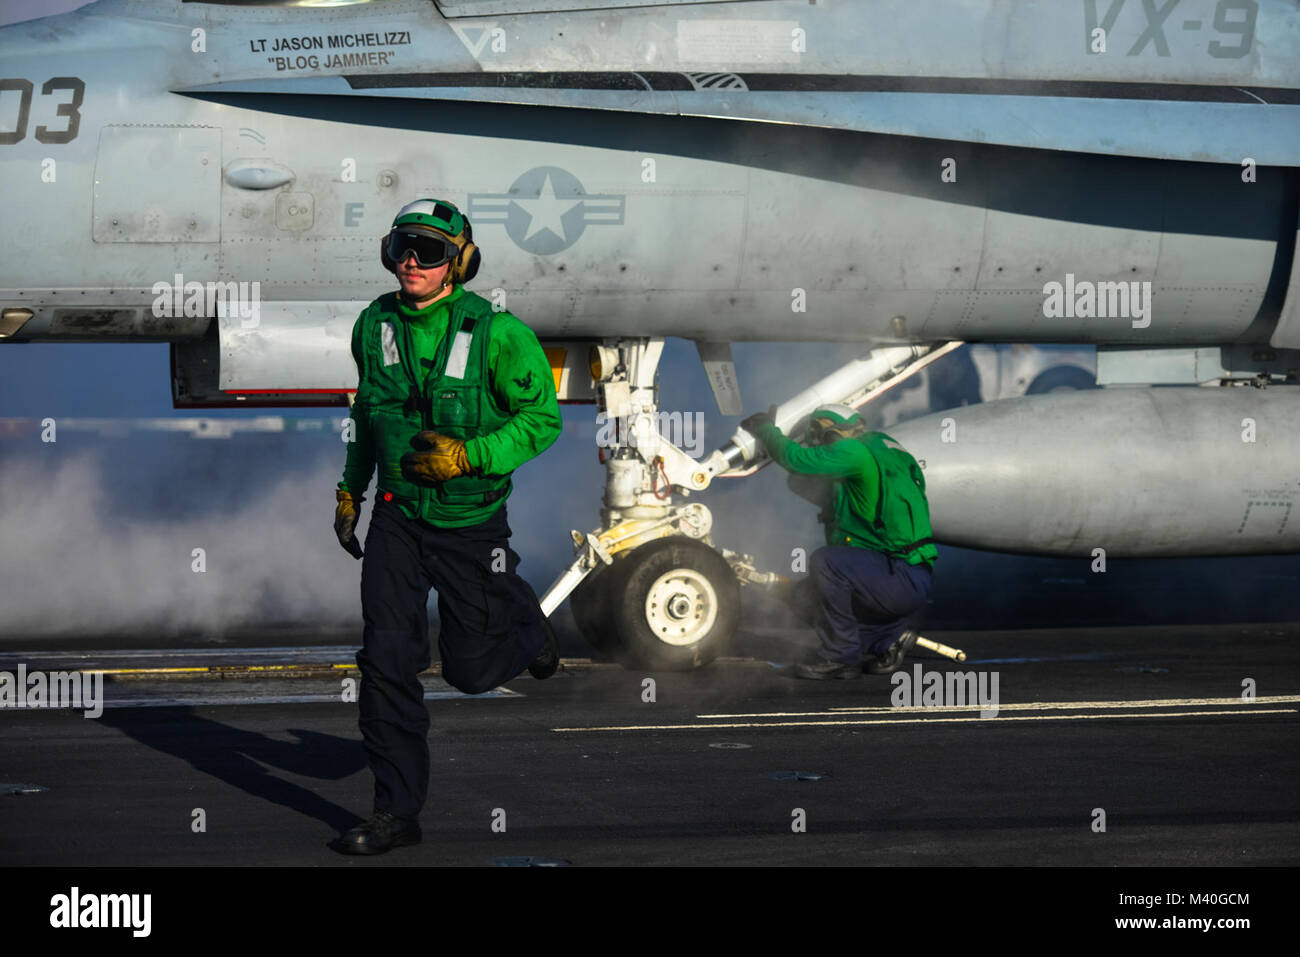 150201-N-TC437-086 PACIFIC OCEAN (Feb. 1, 2015) - Aviation Boatswain's Mate (Equipment) 3rd Class Joel Shrum runs to a safe shot line after connecting a hold back bar to an aircraft on the flight deck of Nimitz-class aircraft carrier USS John C. Stennis (CVN 74). Stennis is currently undergoing an operational training period in preparation for future deployments. (U.S. Navy Photo by Mass Communication Specialist 3rd Class Ignacio D. Perez/ Released) 150201-N-TC437-086 by USS John C. Stennis (CVN 74) Official Stock Photo